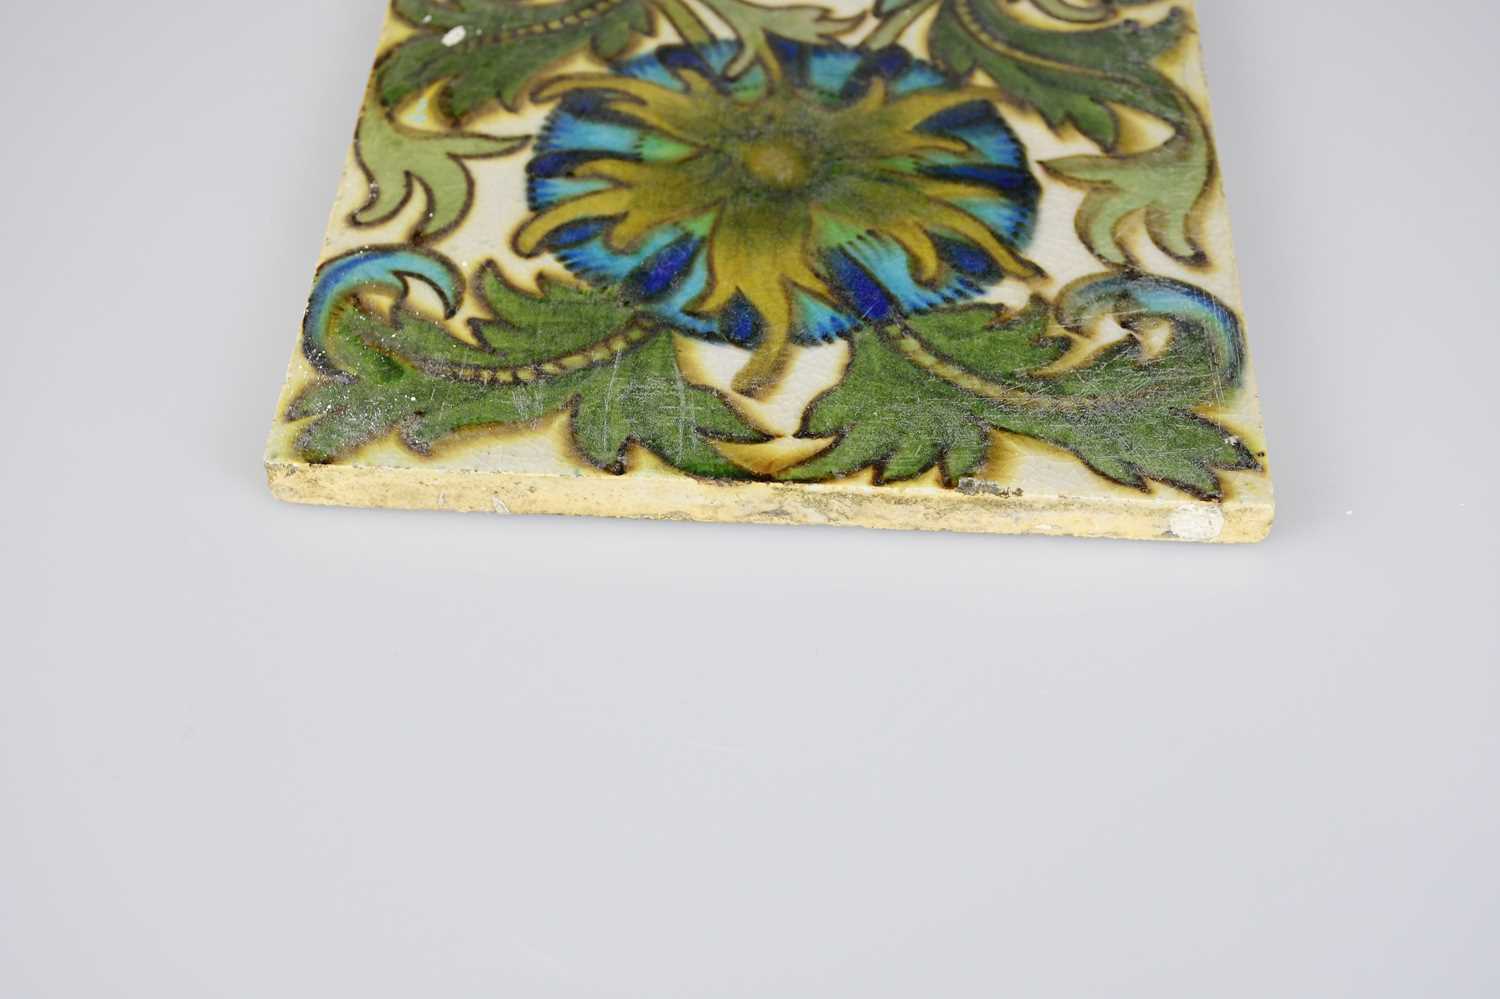 ATTRIBUTED TO MAW & CO; an Art Pottery tile painted with floral decoration, in shades of green, - Image 5 of 6